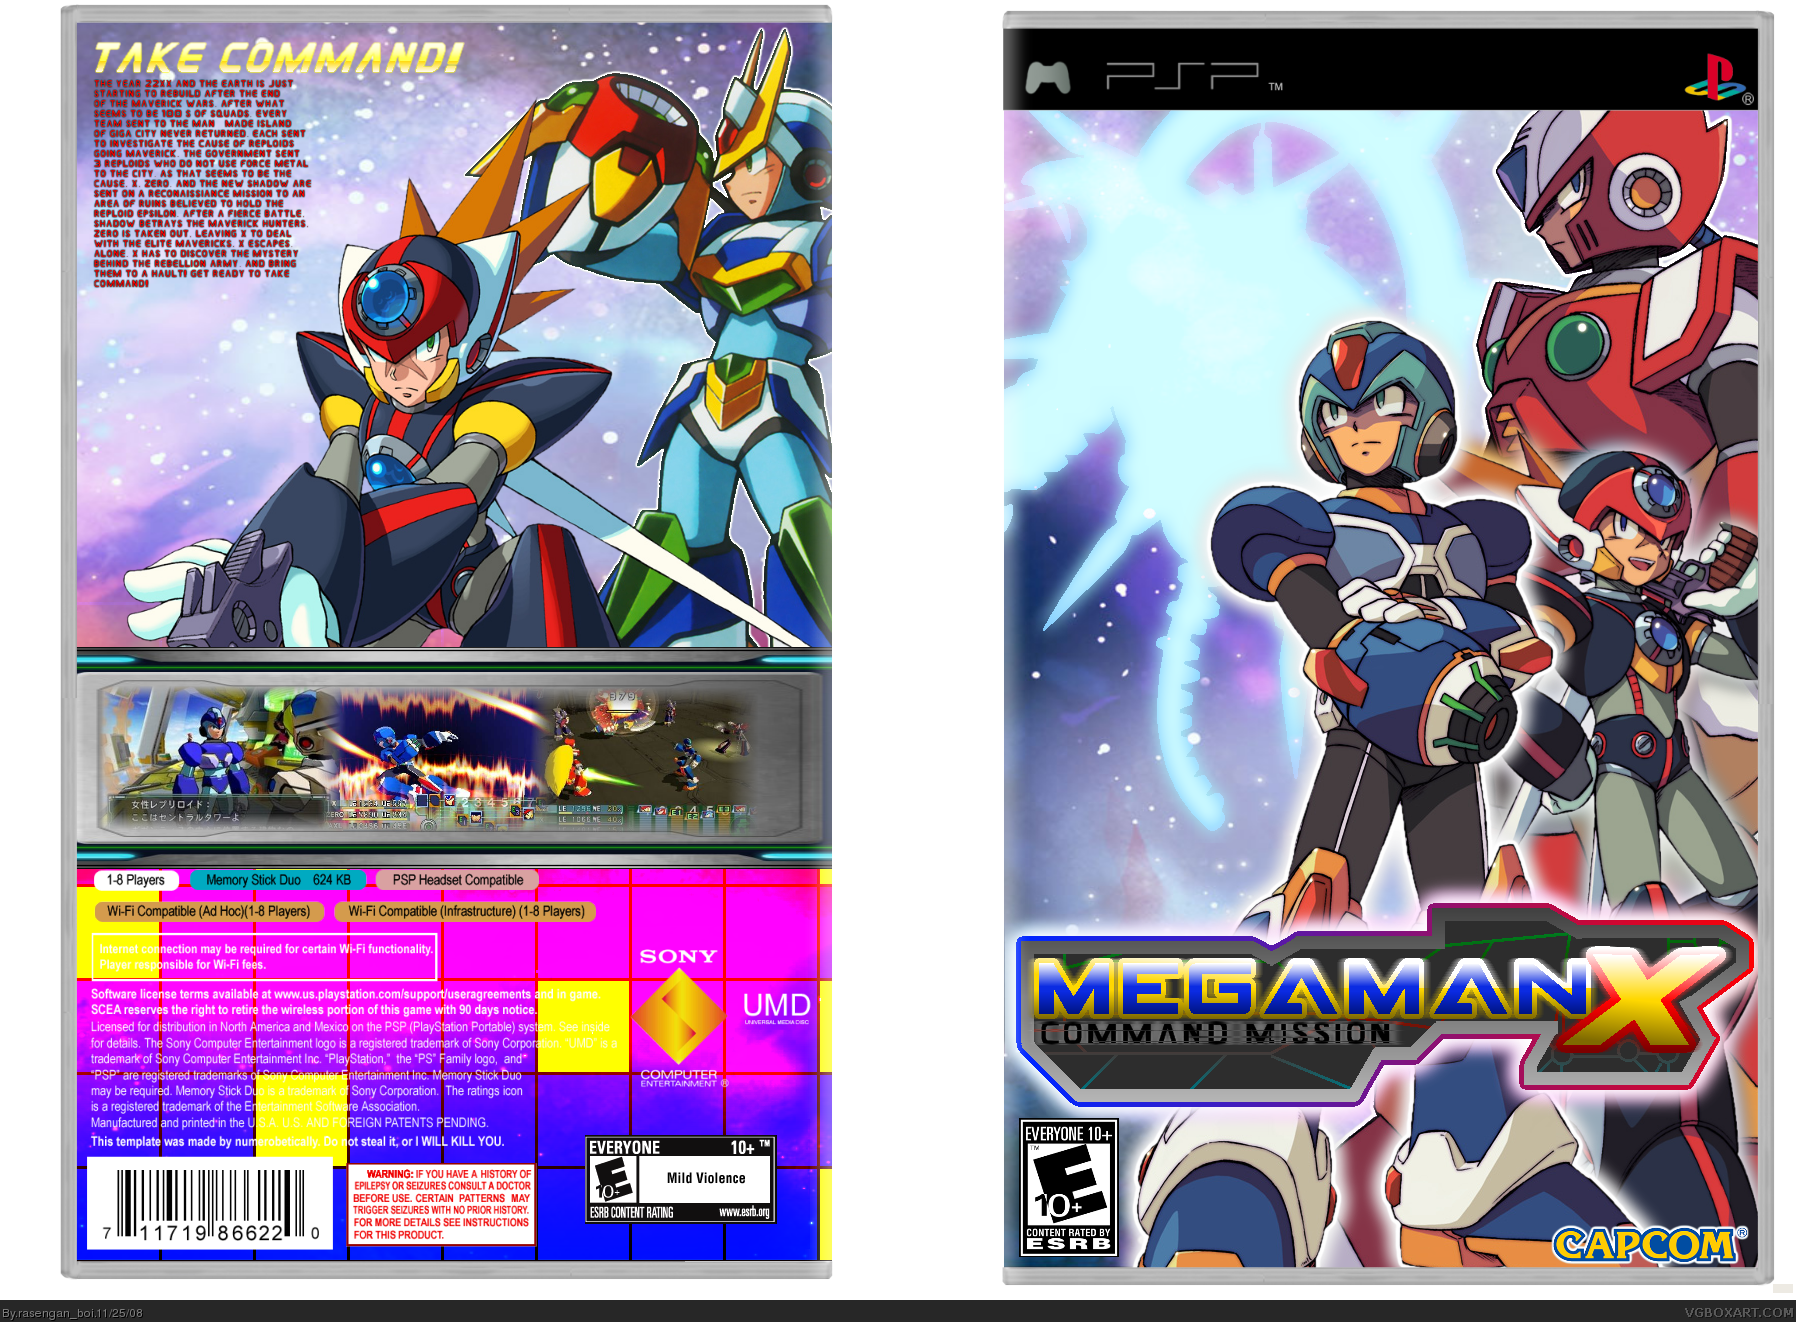 Viewing full size MegaMan X Command Mission box cover.